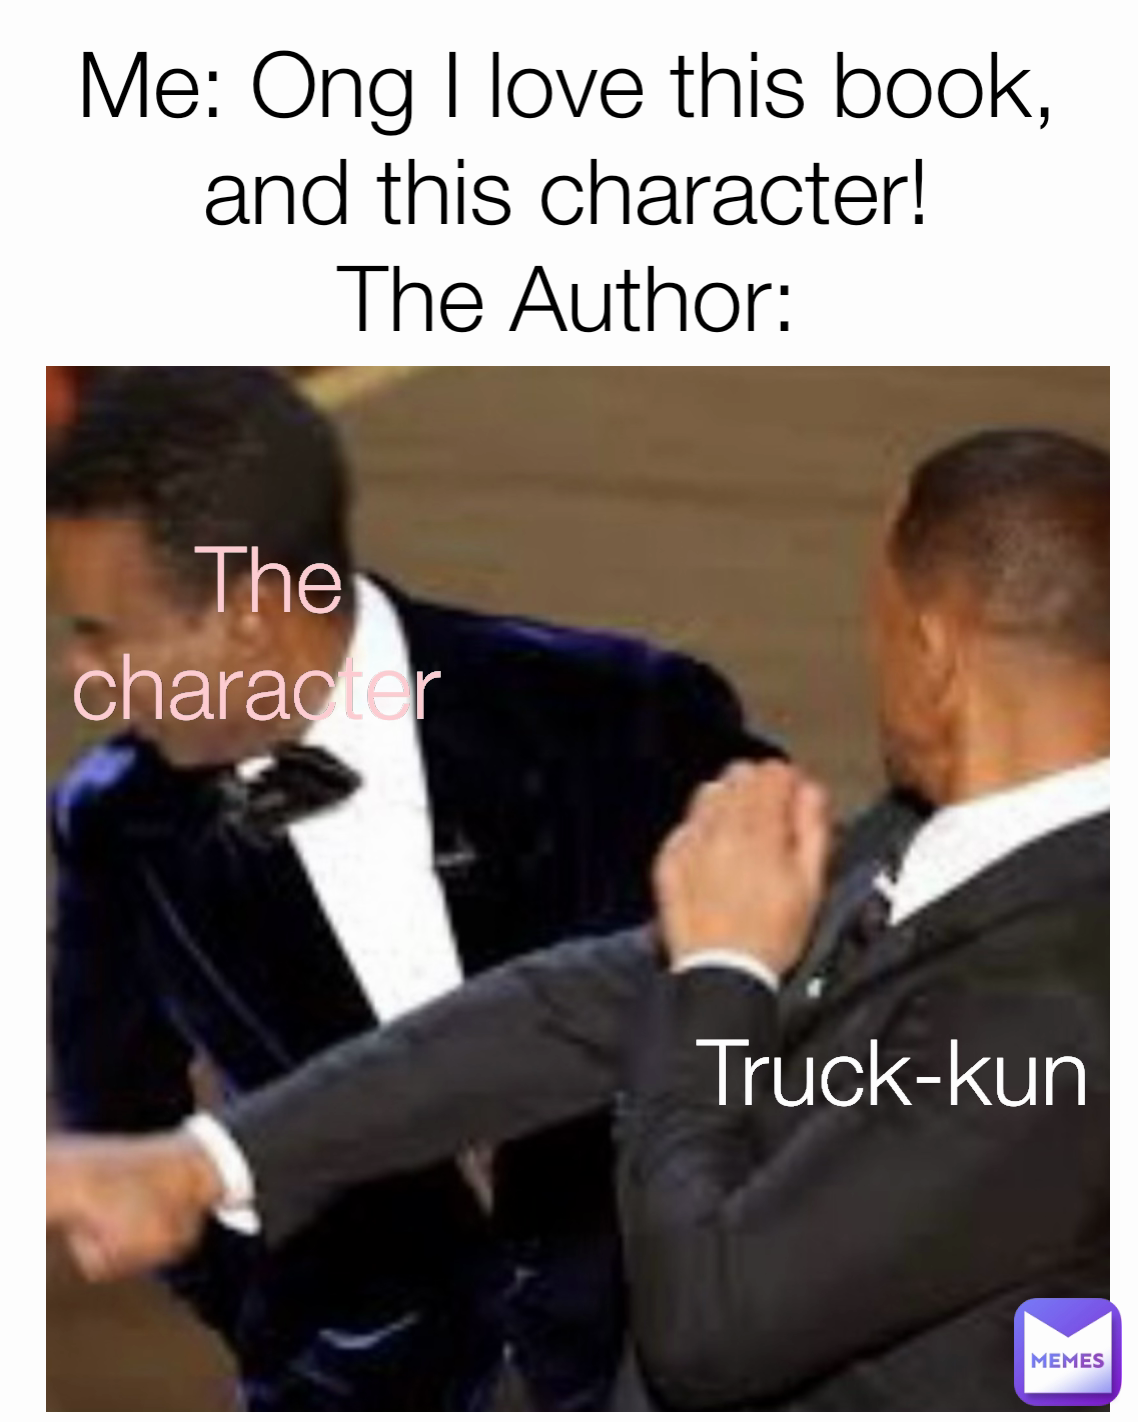 Truck-kun Me: Ong I love this book, and this character!
The Author: The character 